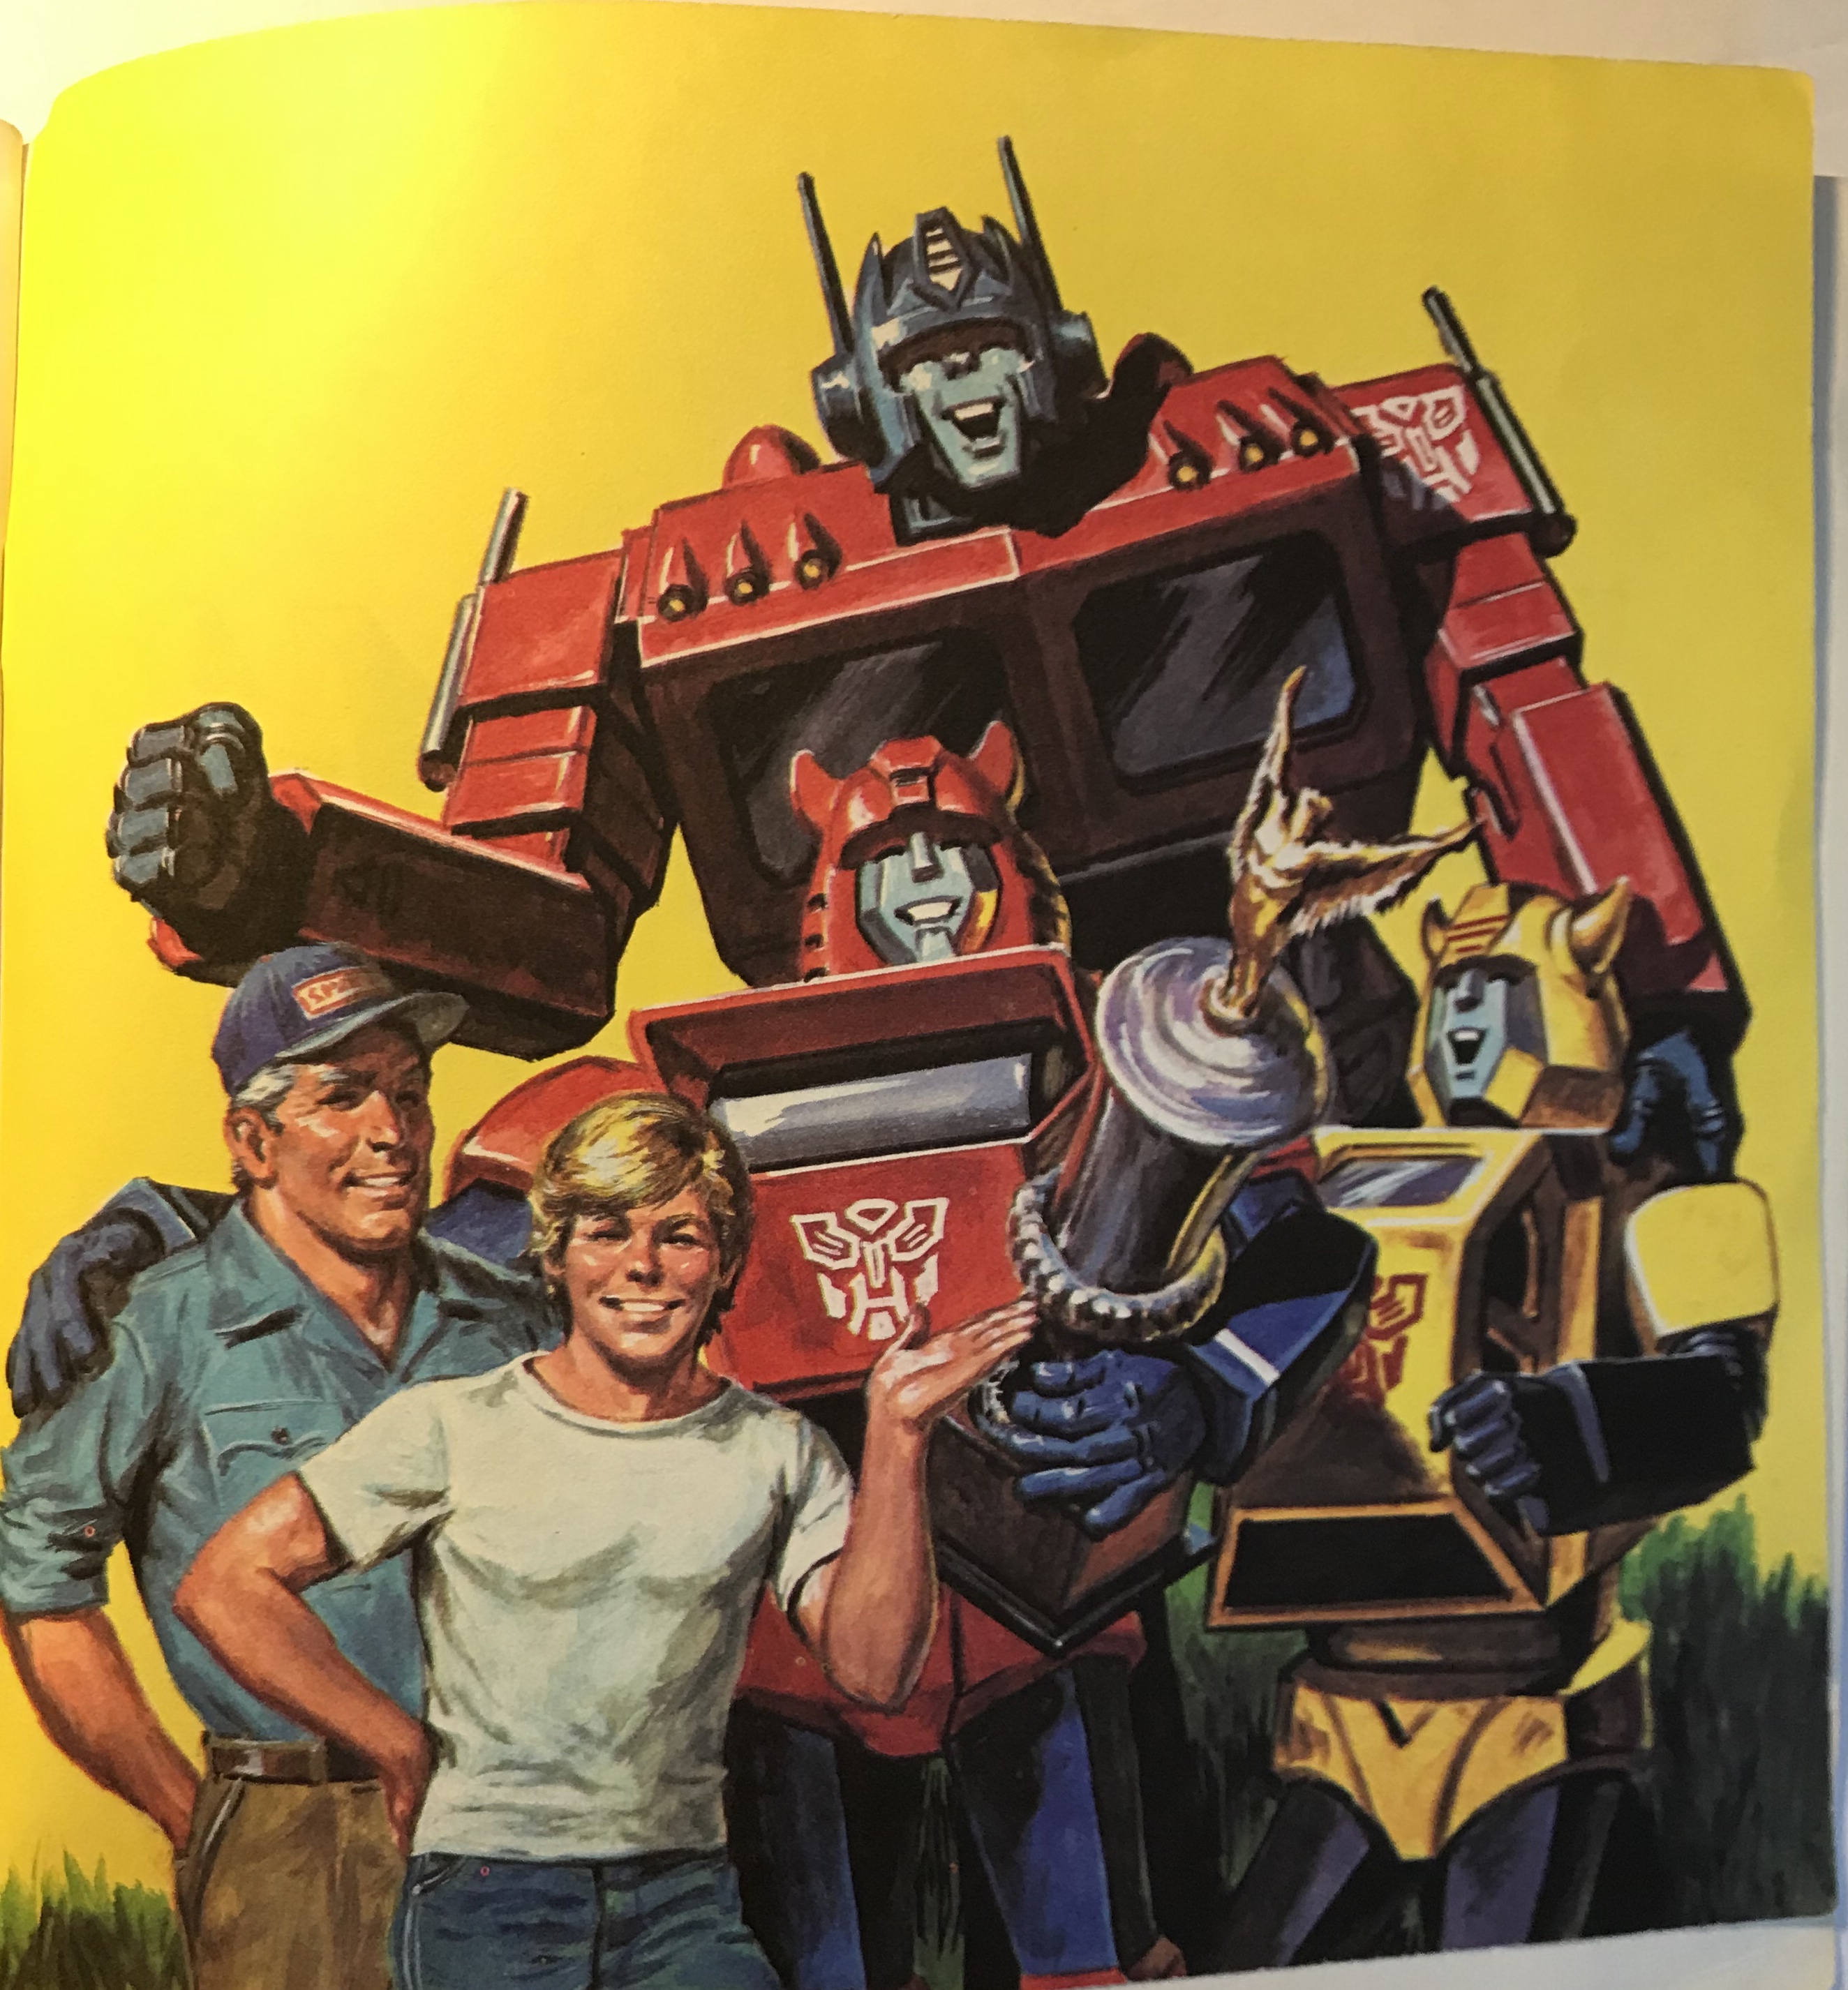 Optimus, Bumblebee, Cliffjumper, Spike and Sparkplug standing with a trophy